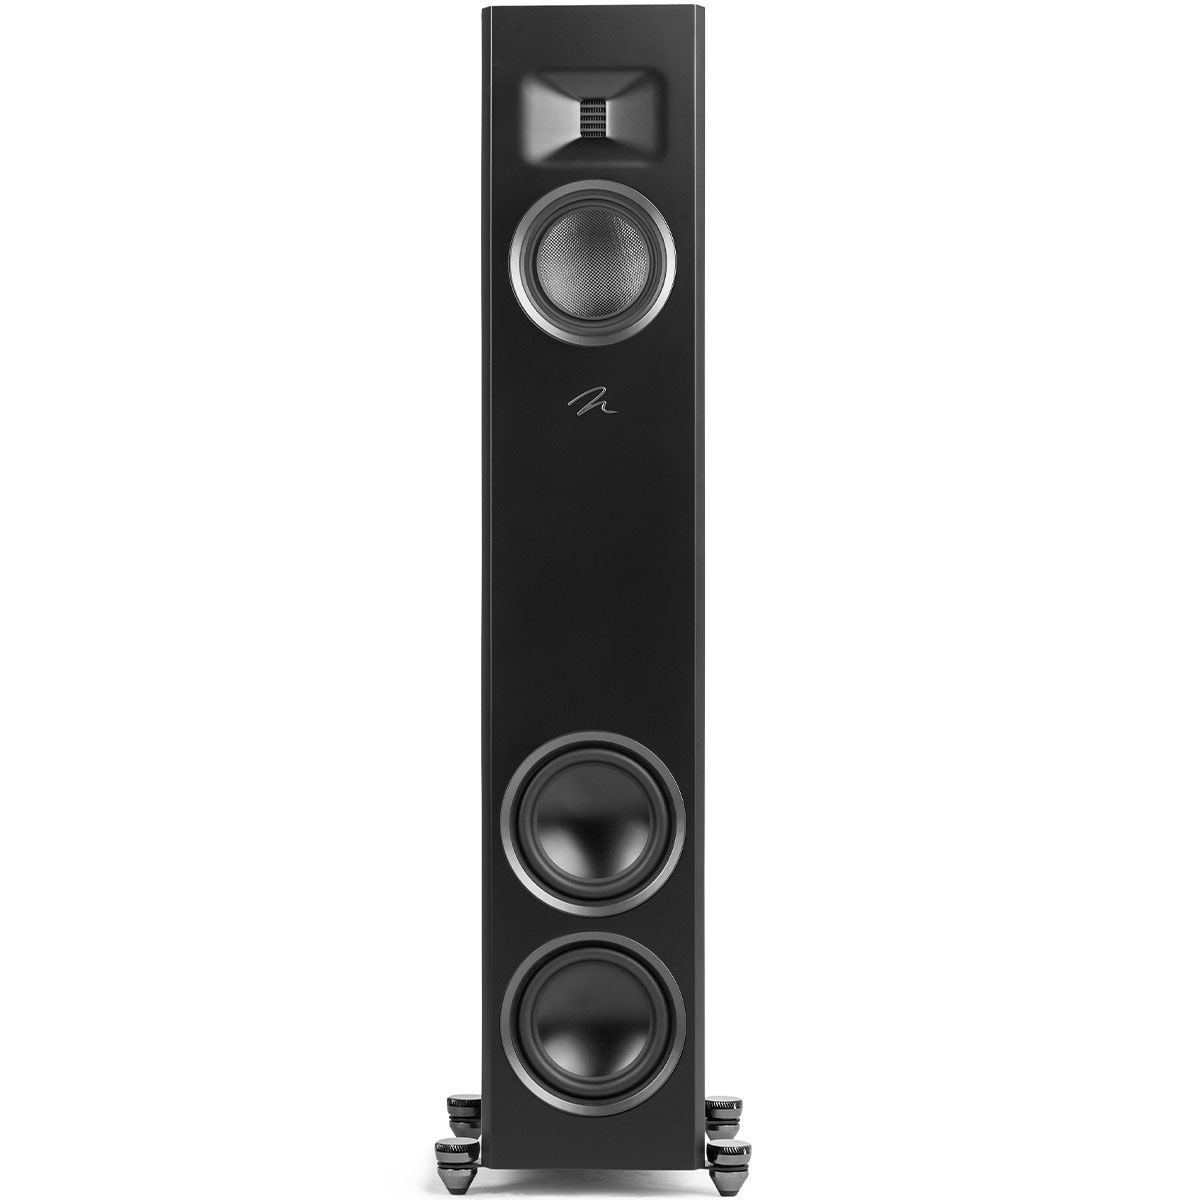 MartinLogan Motion XT F20 Floorstanding Speaker in black, front view without grilles on white background